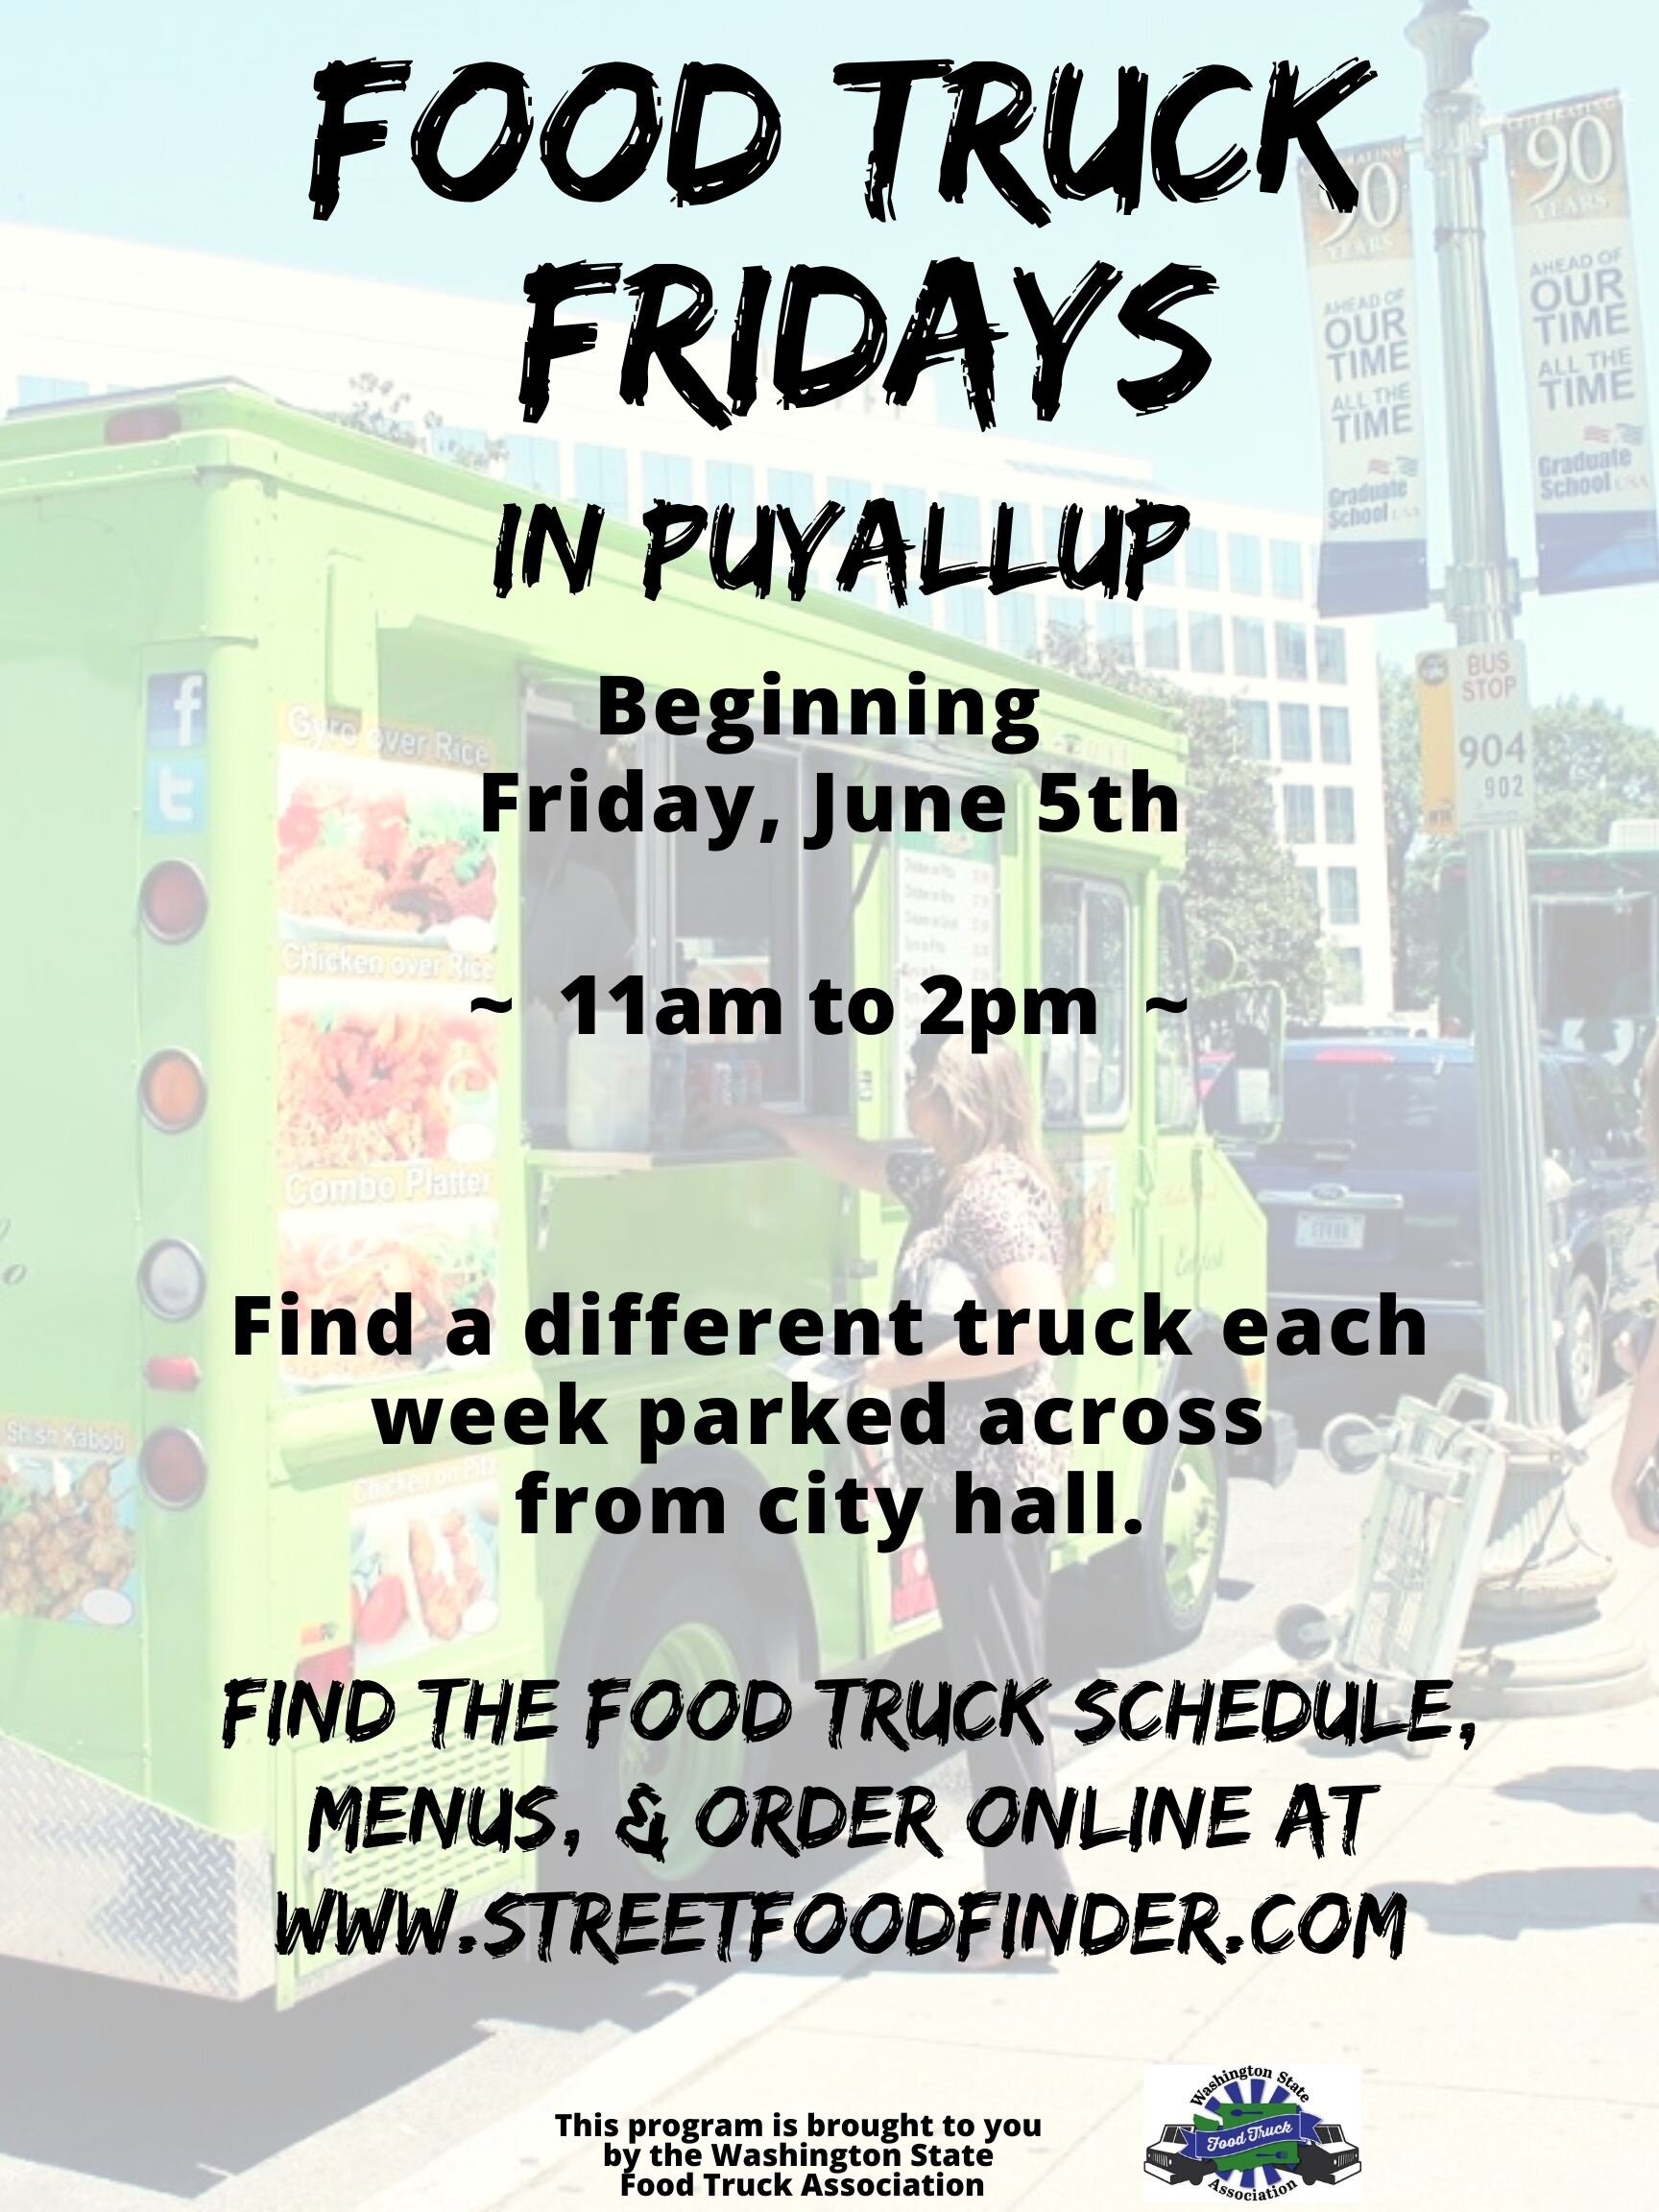  Image:  Example of a promotional poster for Food Truck Fridays in Puyallup.  